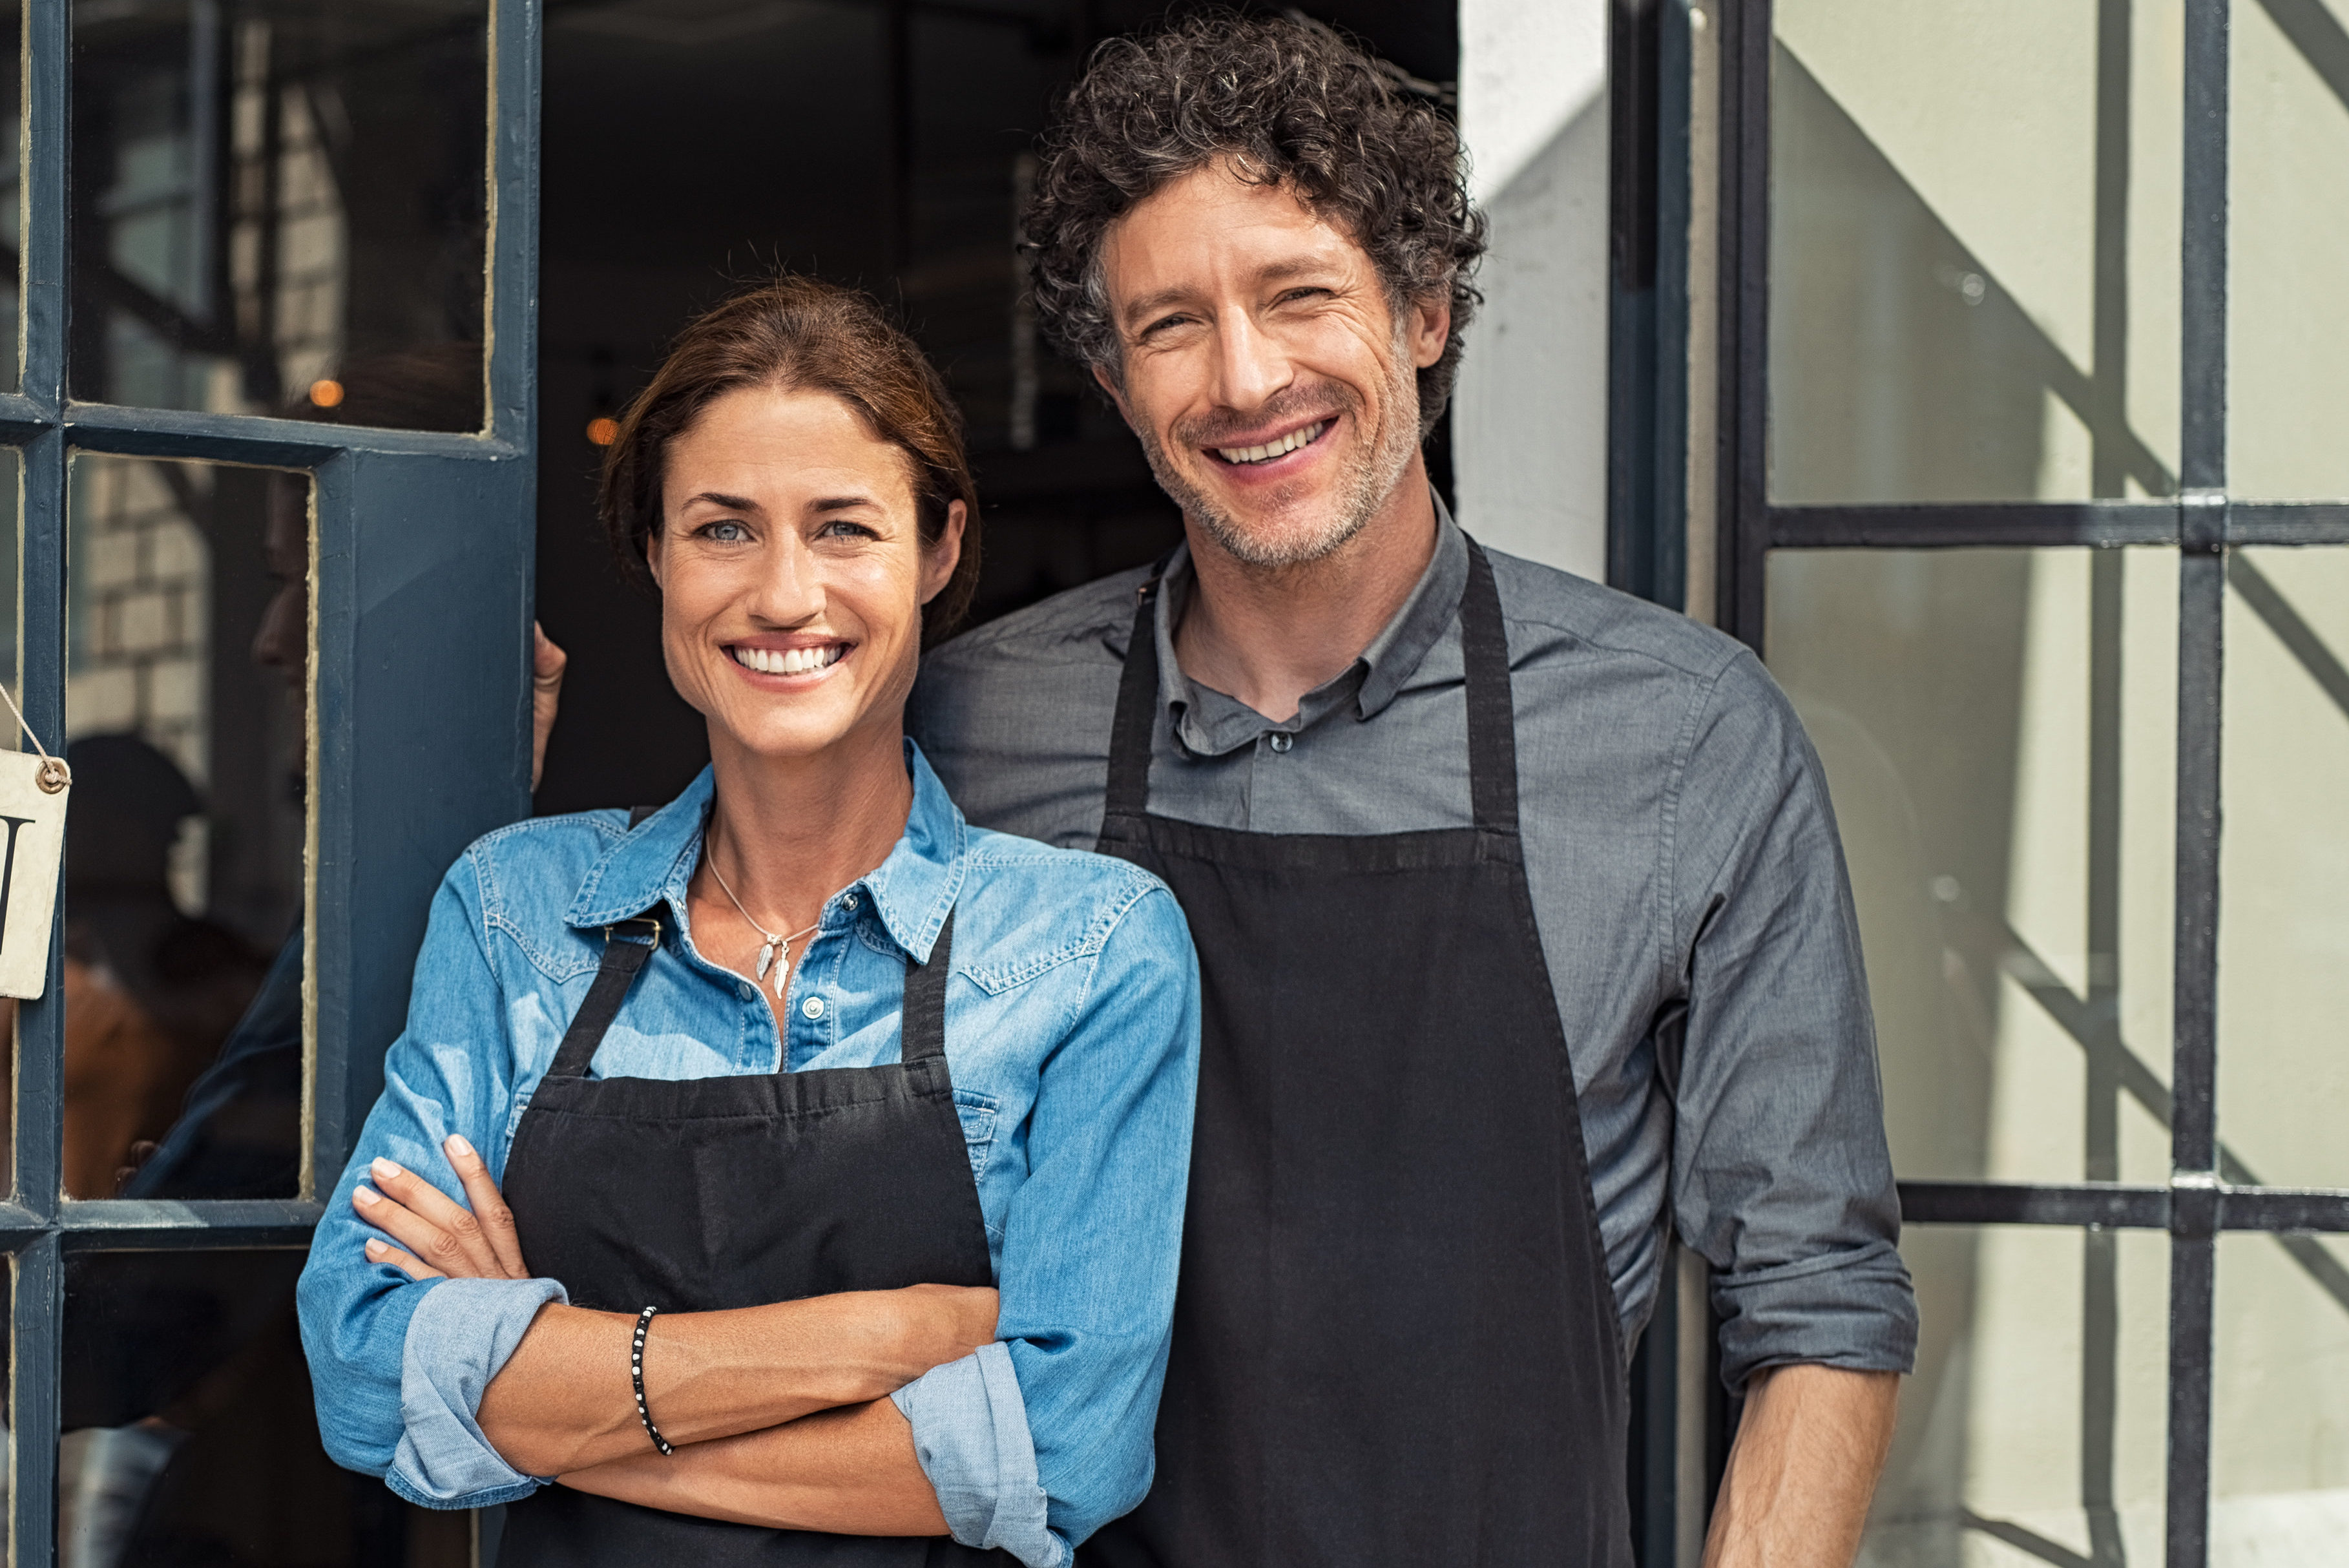 Two cheerful small business owners smiling and looking at camera while standing at entrance door. Happy mature man and mid woman at entrance of newly opened restaurant with open sign board. Smiling couple welcoming customers to small business shop.